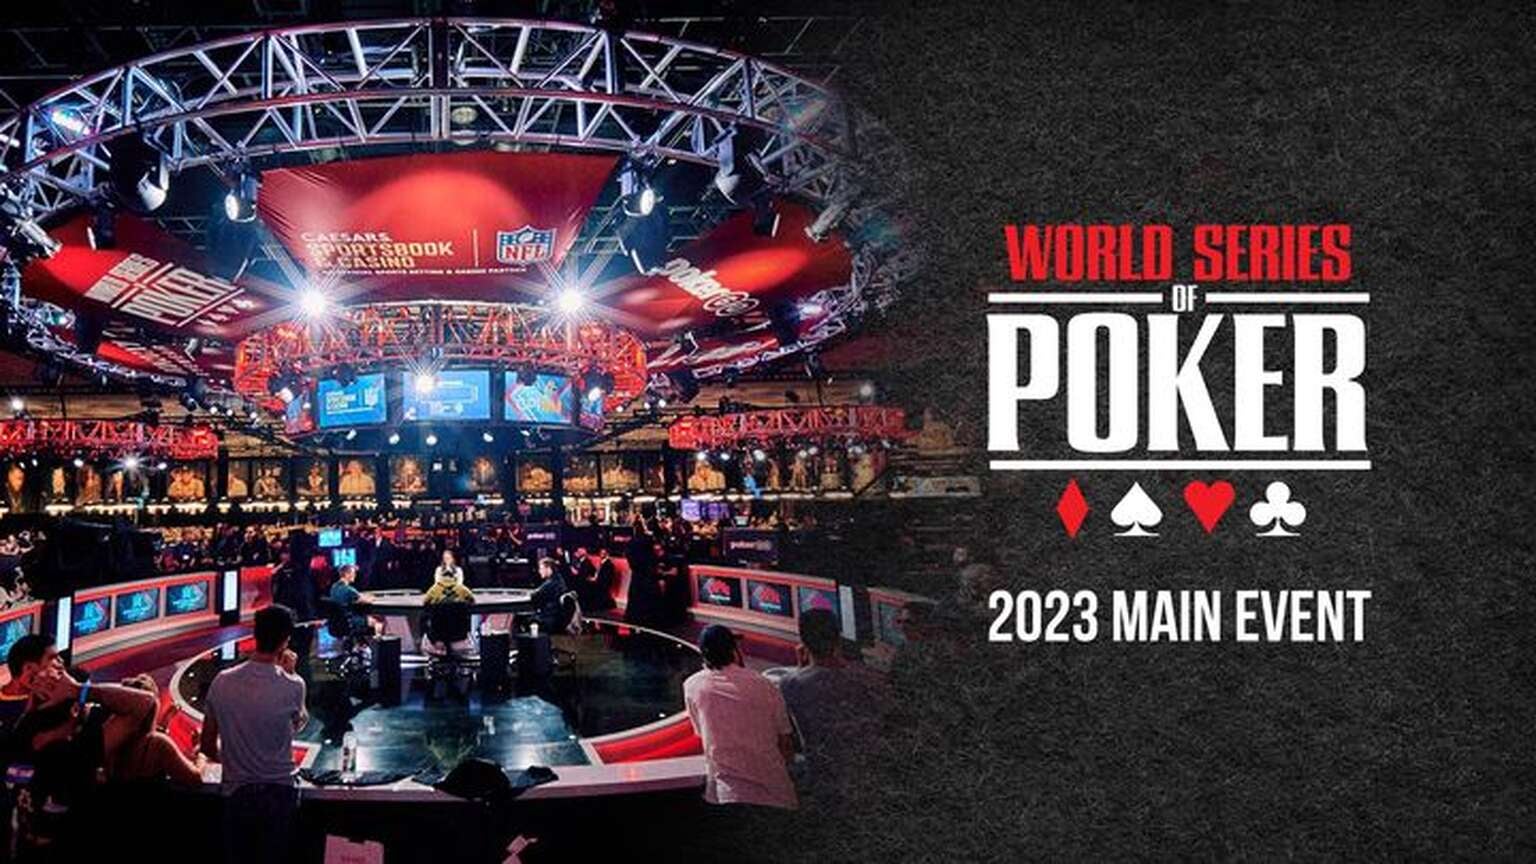 How to Watch the 2023 World Series of Poker Main Event Without Cable